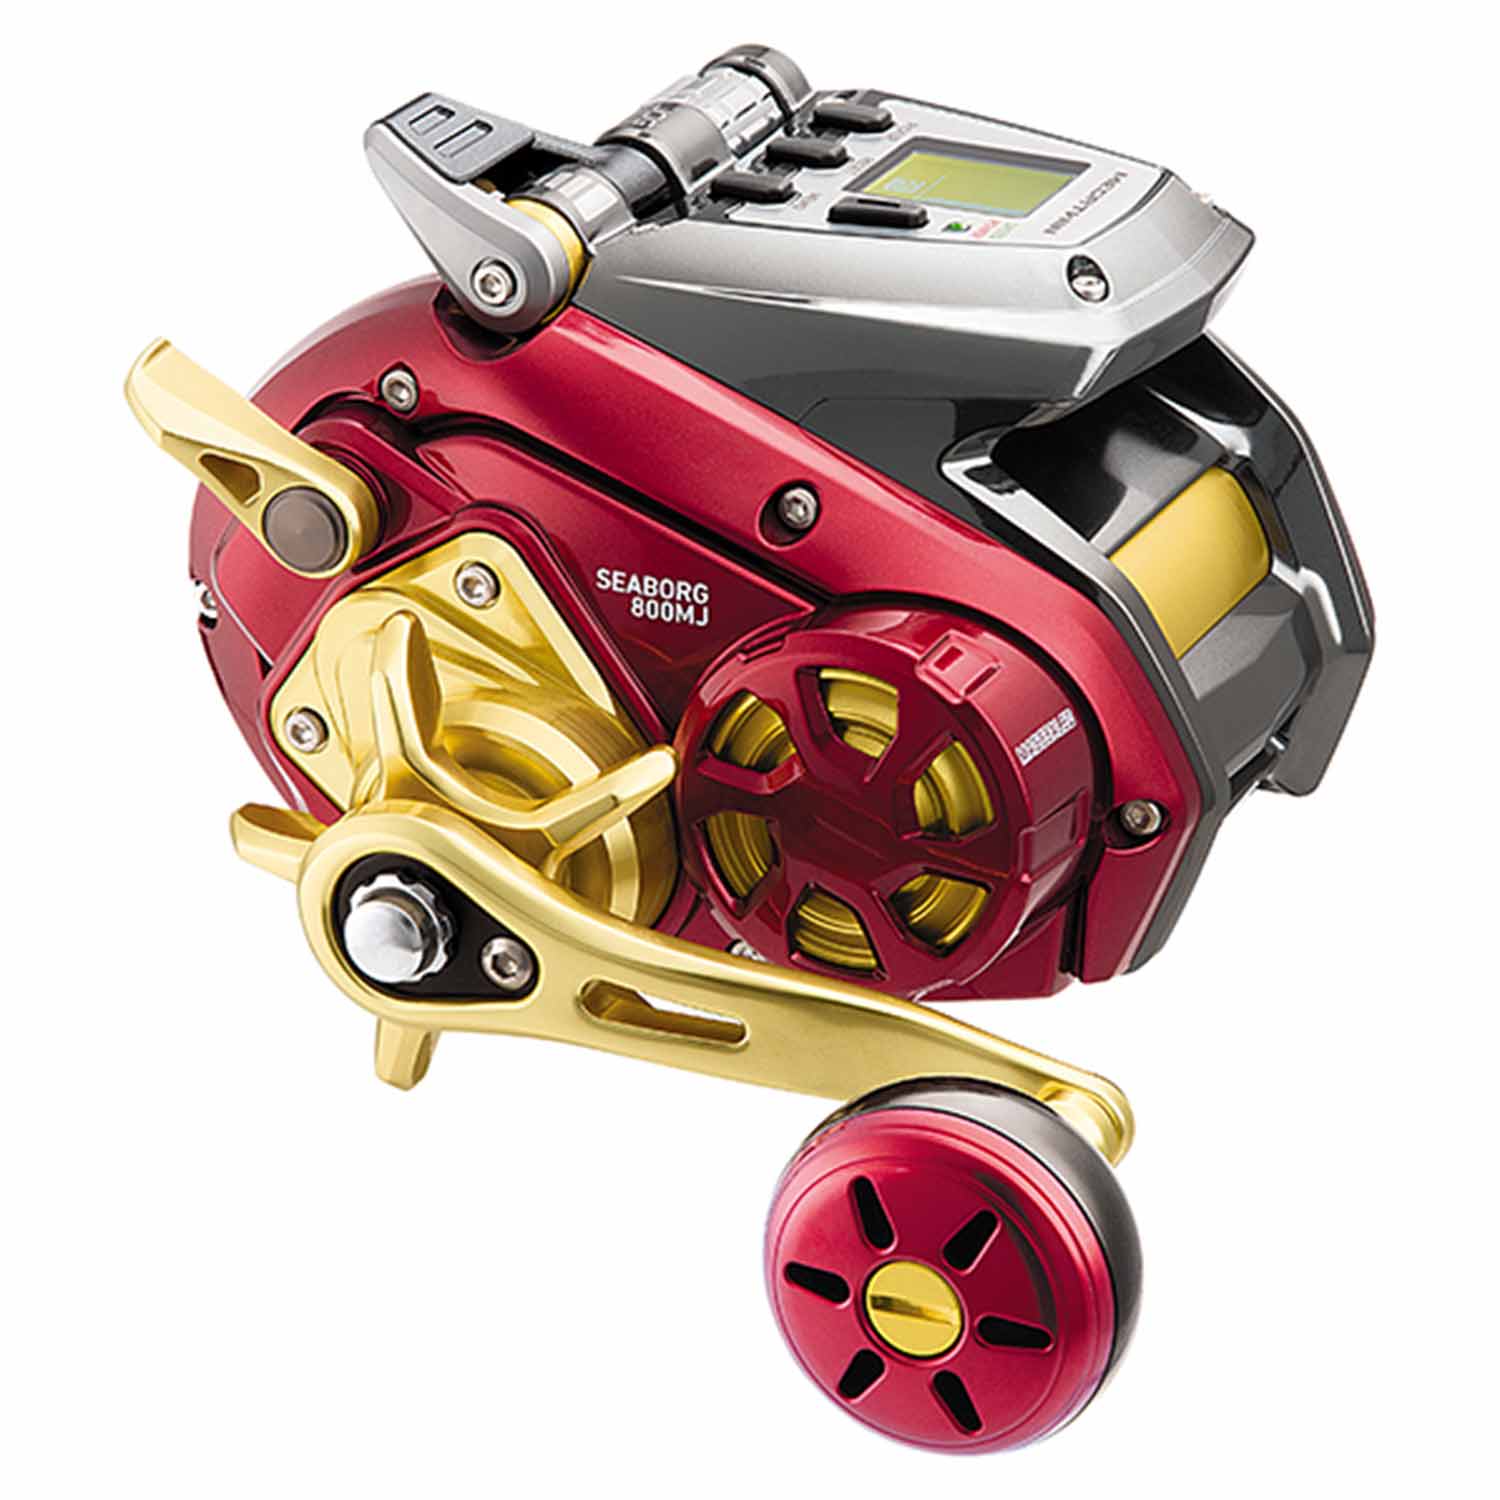 DAIWA Seaborg 800 Megatwin Power Assist Conventional Reel